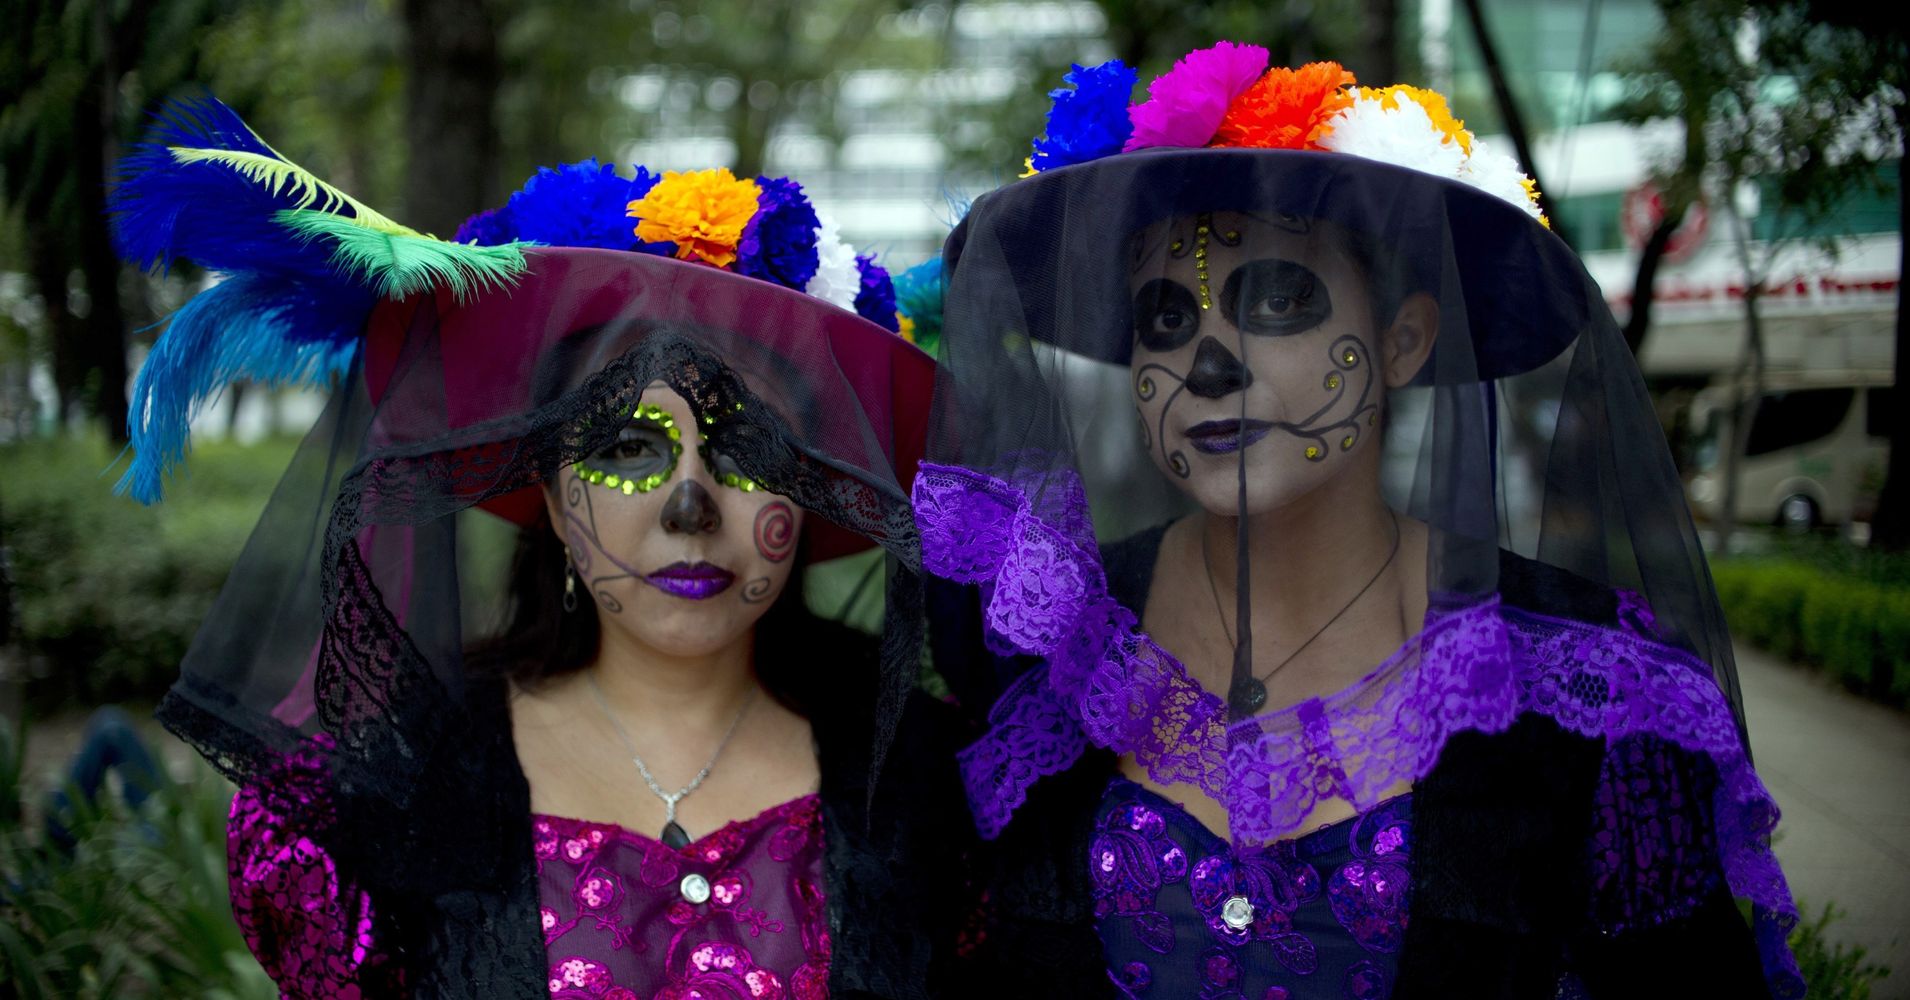 On Day Of The Dead, A Celebration Of Life To Remember The Deceased